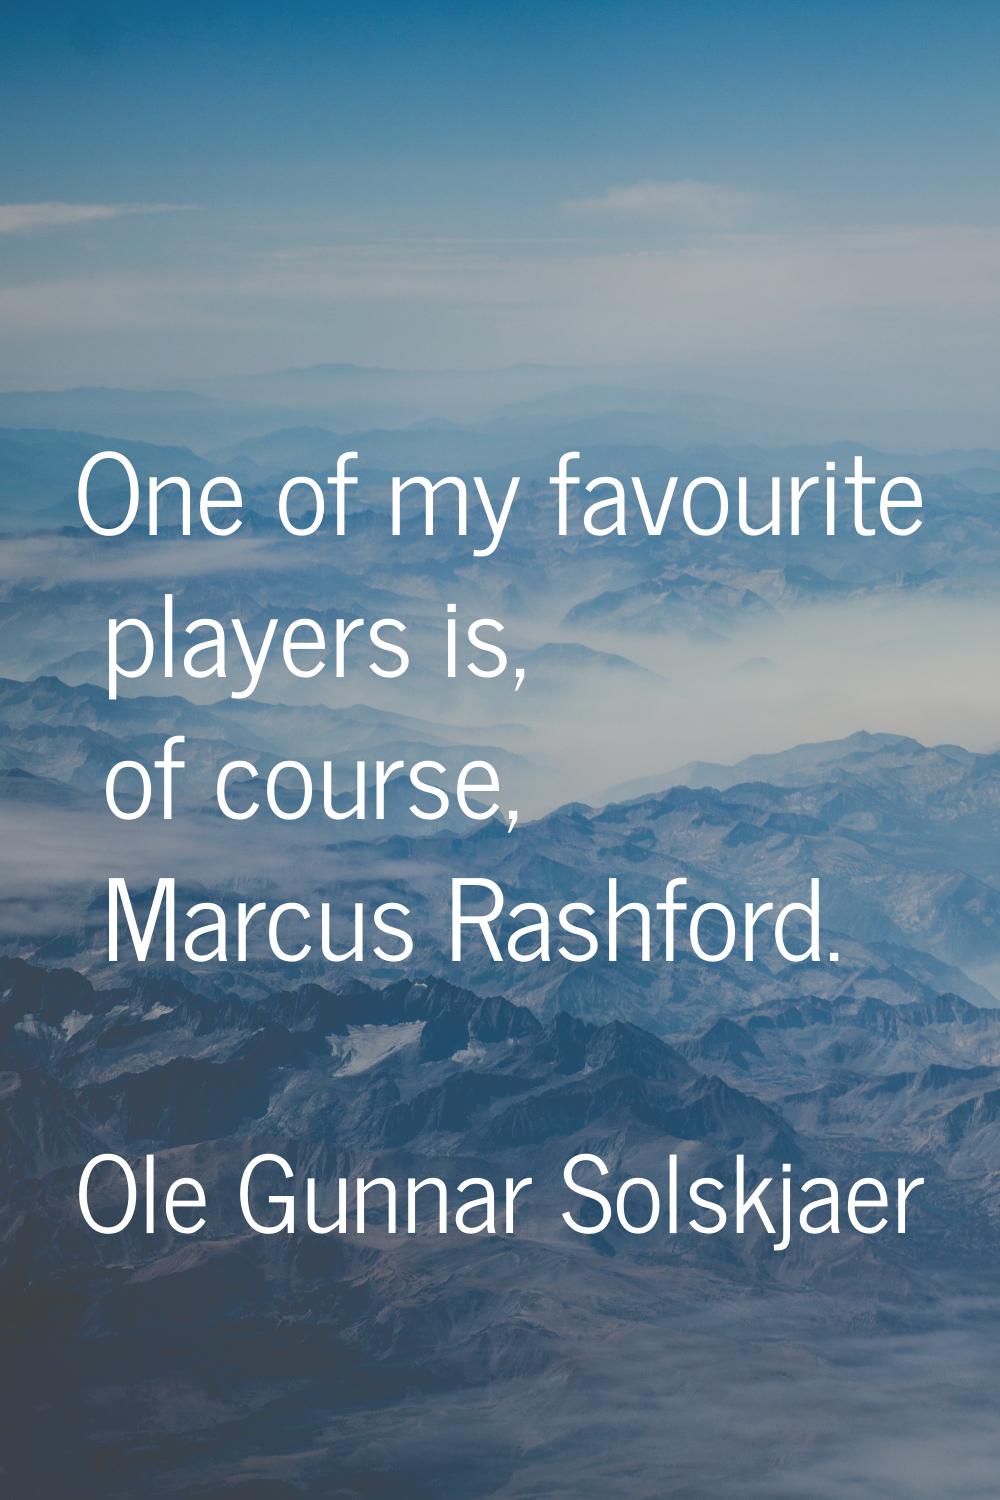 One of my favourite players is, of course, Marcus Rashford.